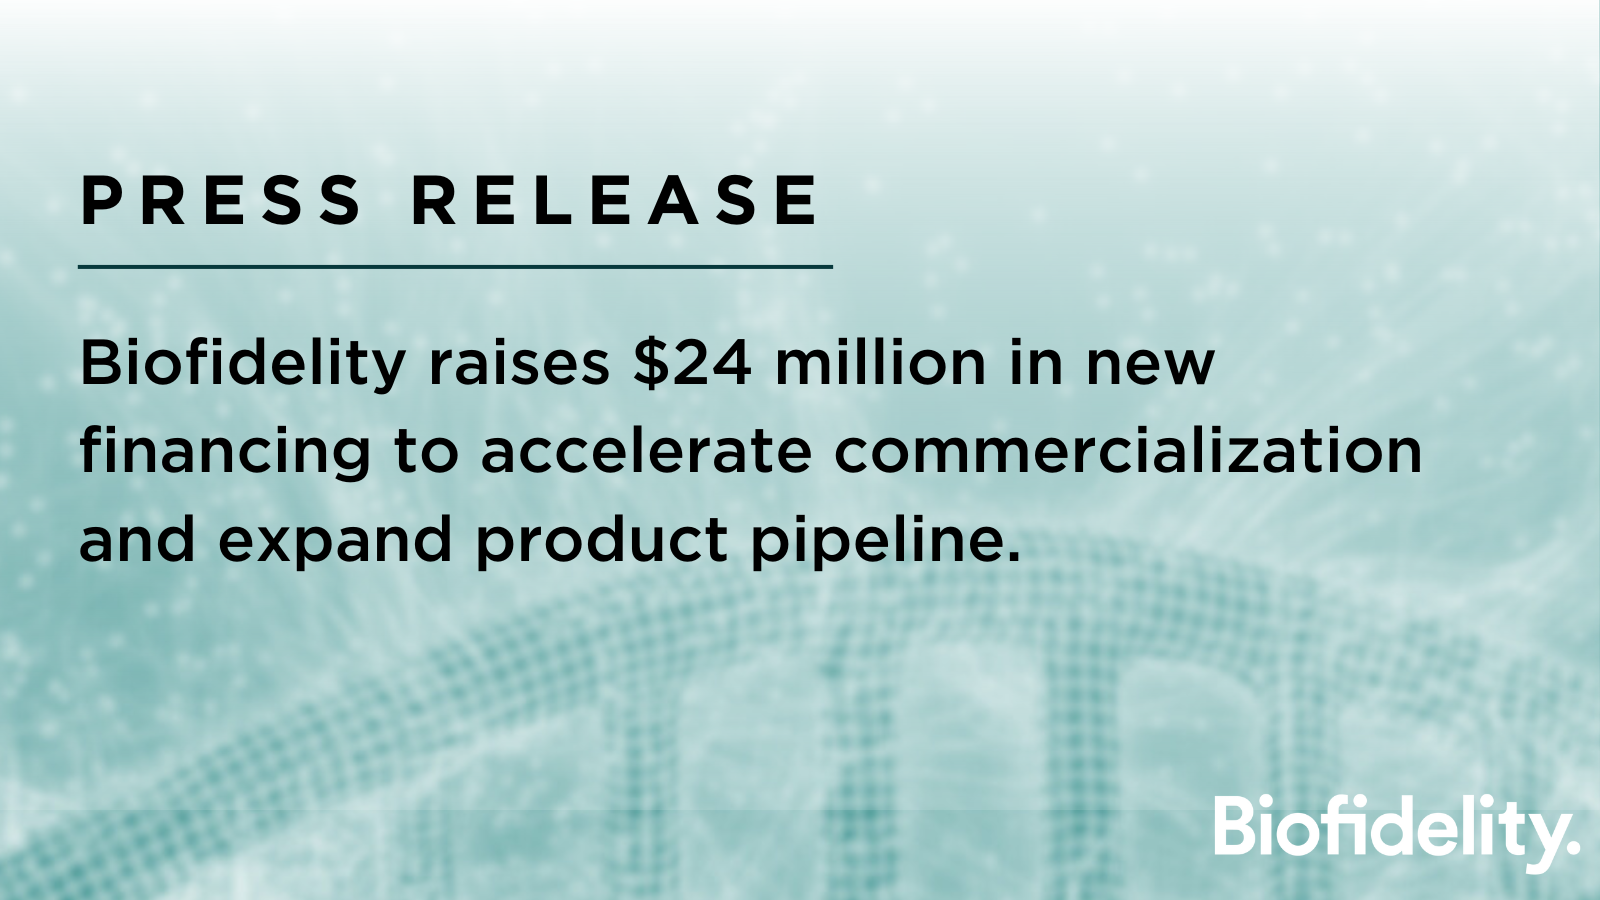 Biofidelity raises $24 million in new financing to accelerate commercialization and expand product pipeline